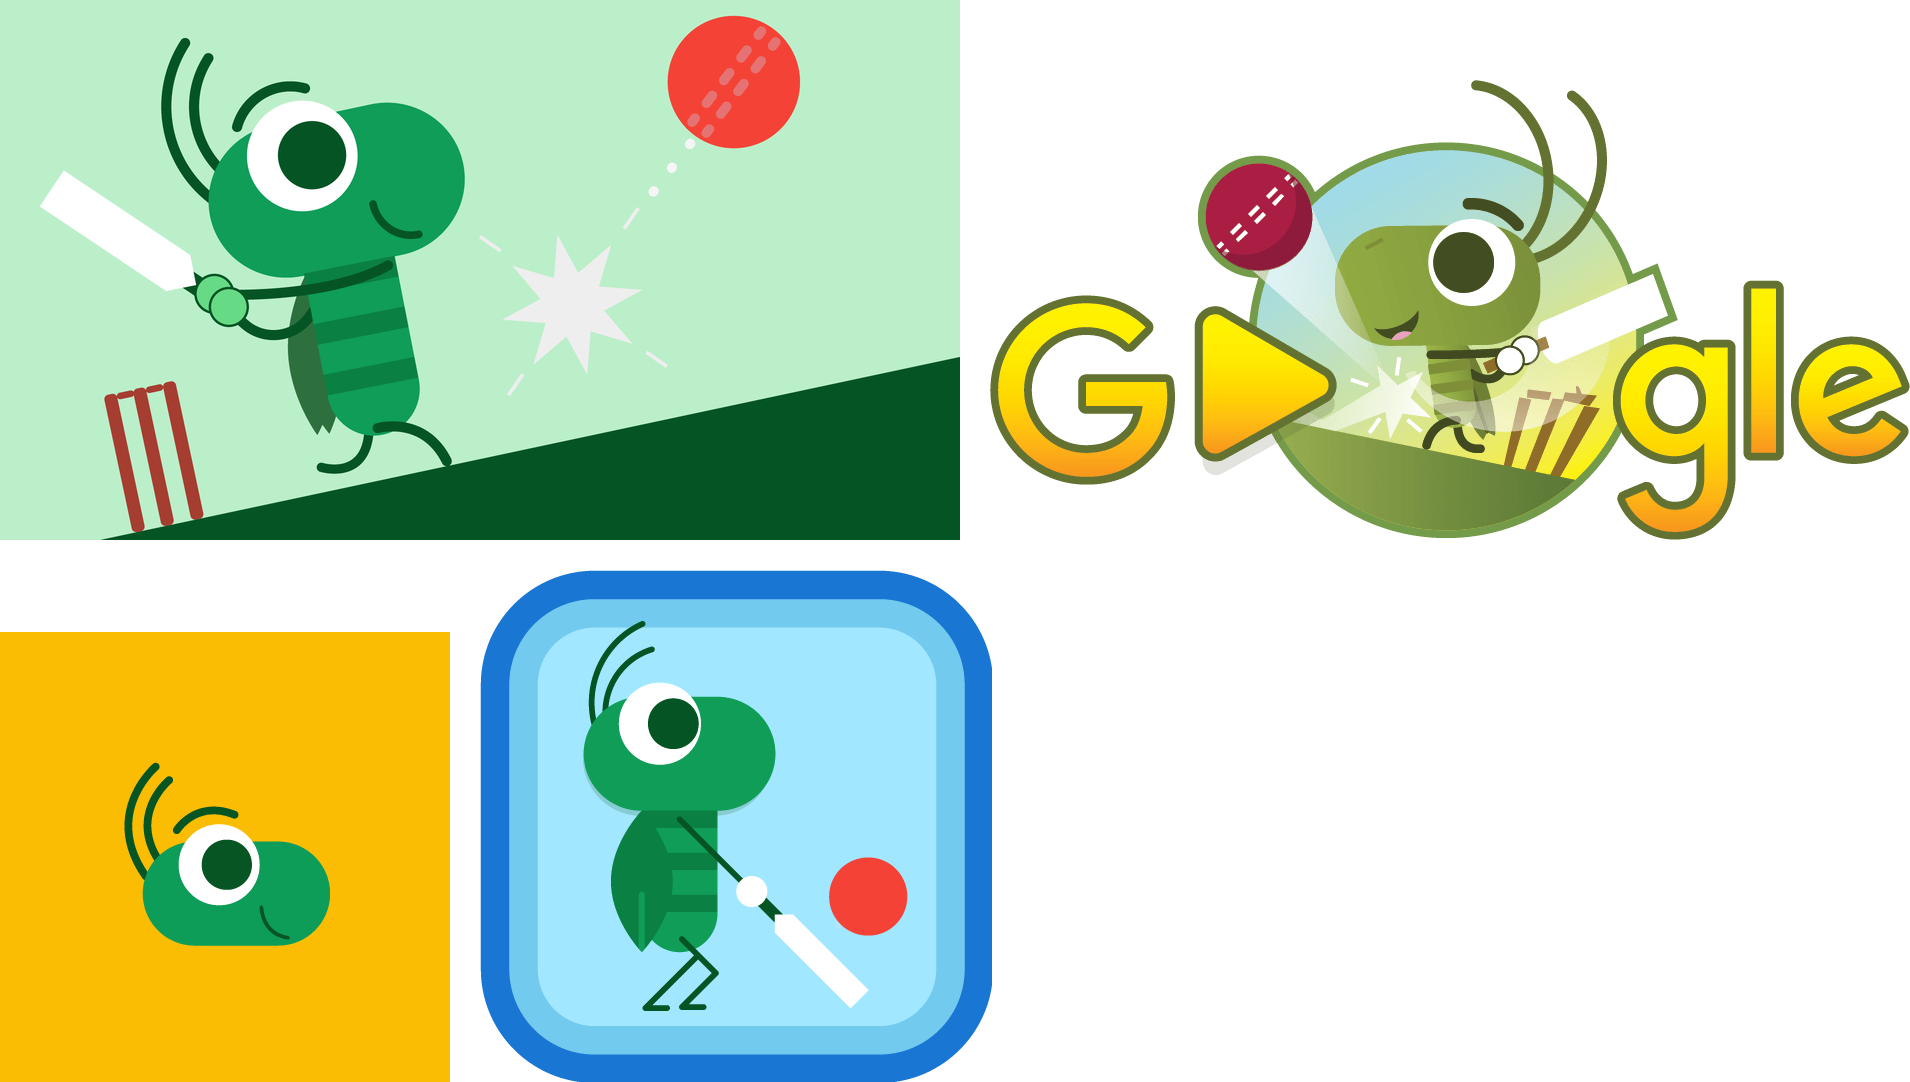 Google Play Games - Icons & Banner